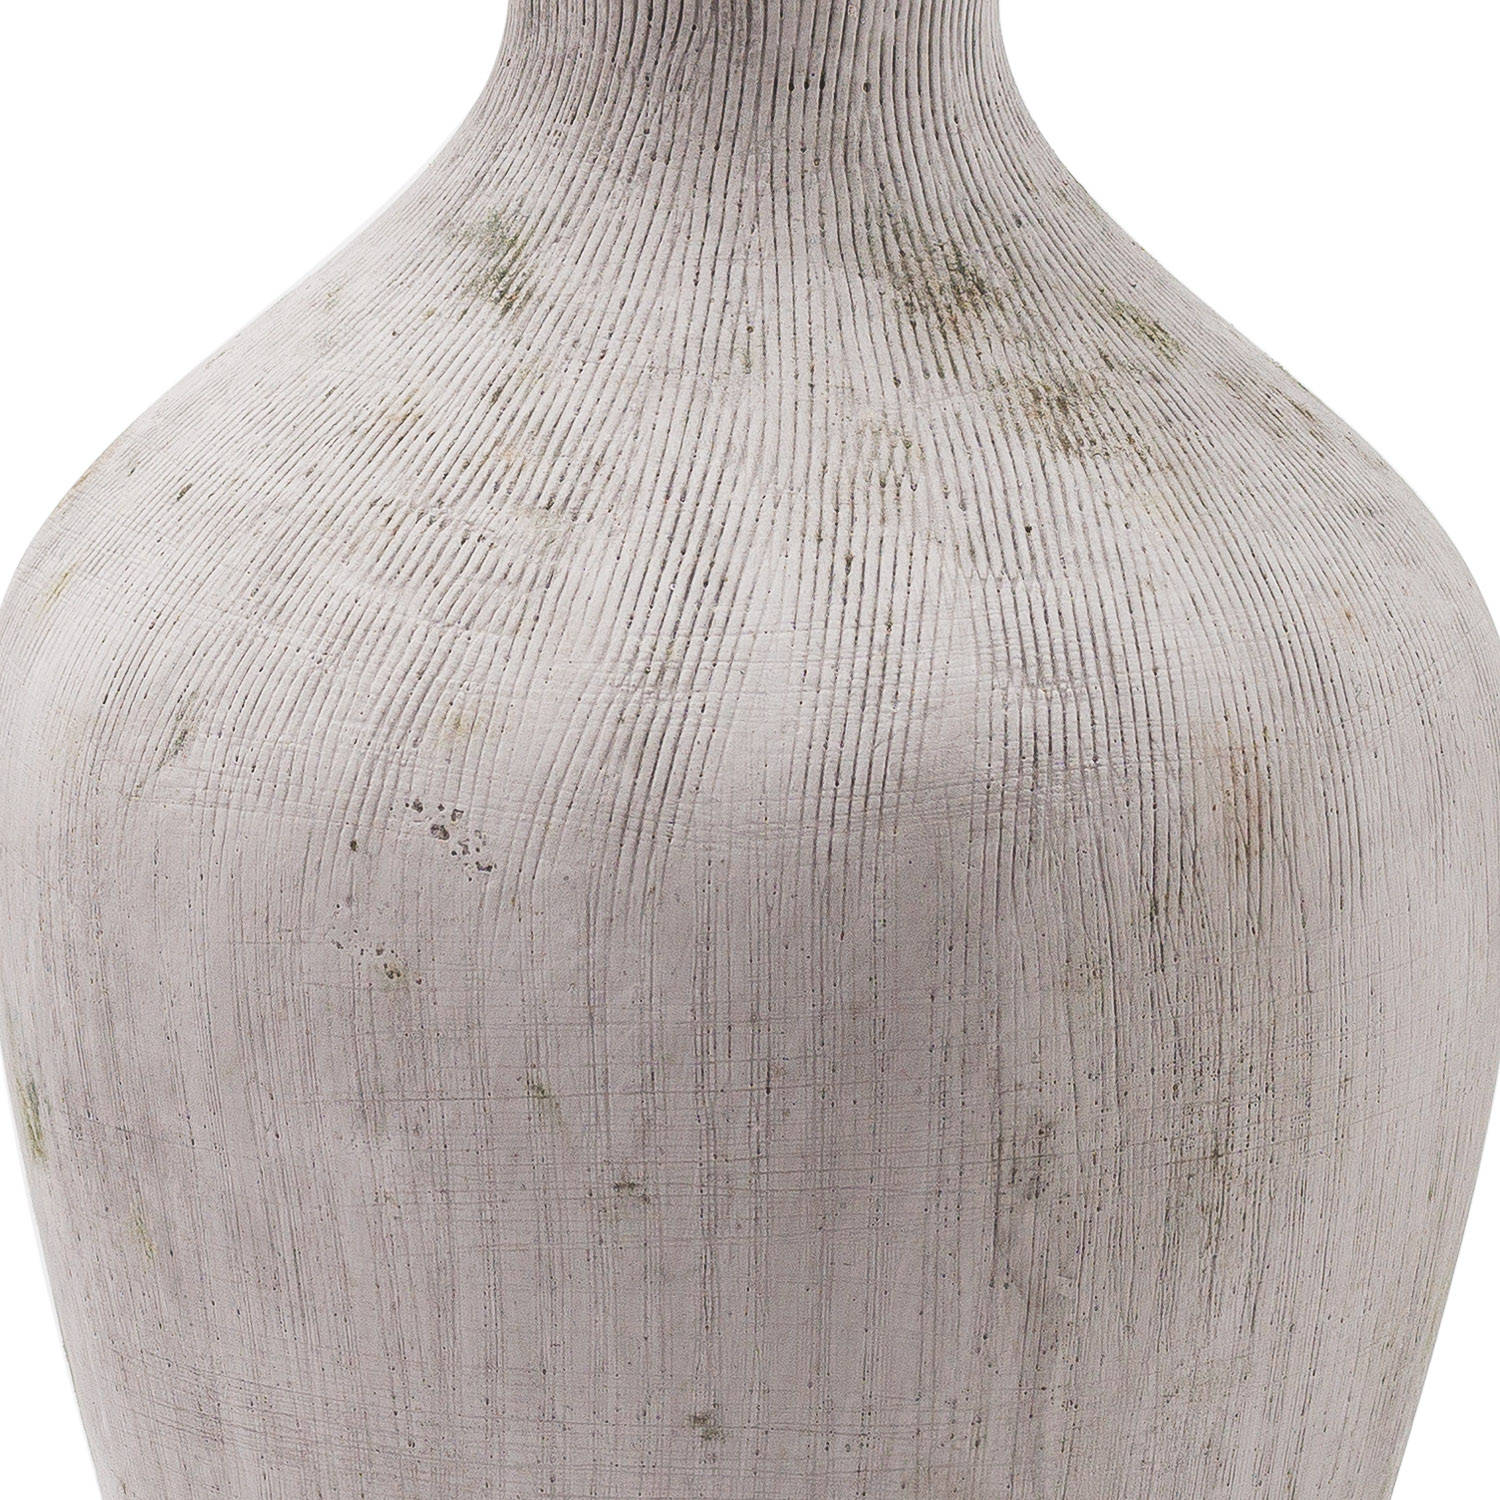 bloomville-ellipse-stone-vase_20727-a fabric from JLP